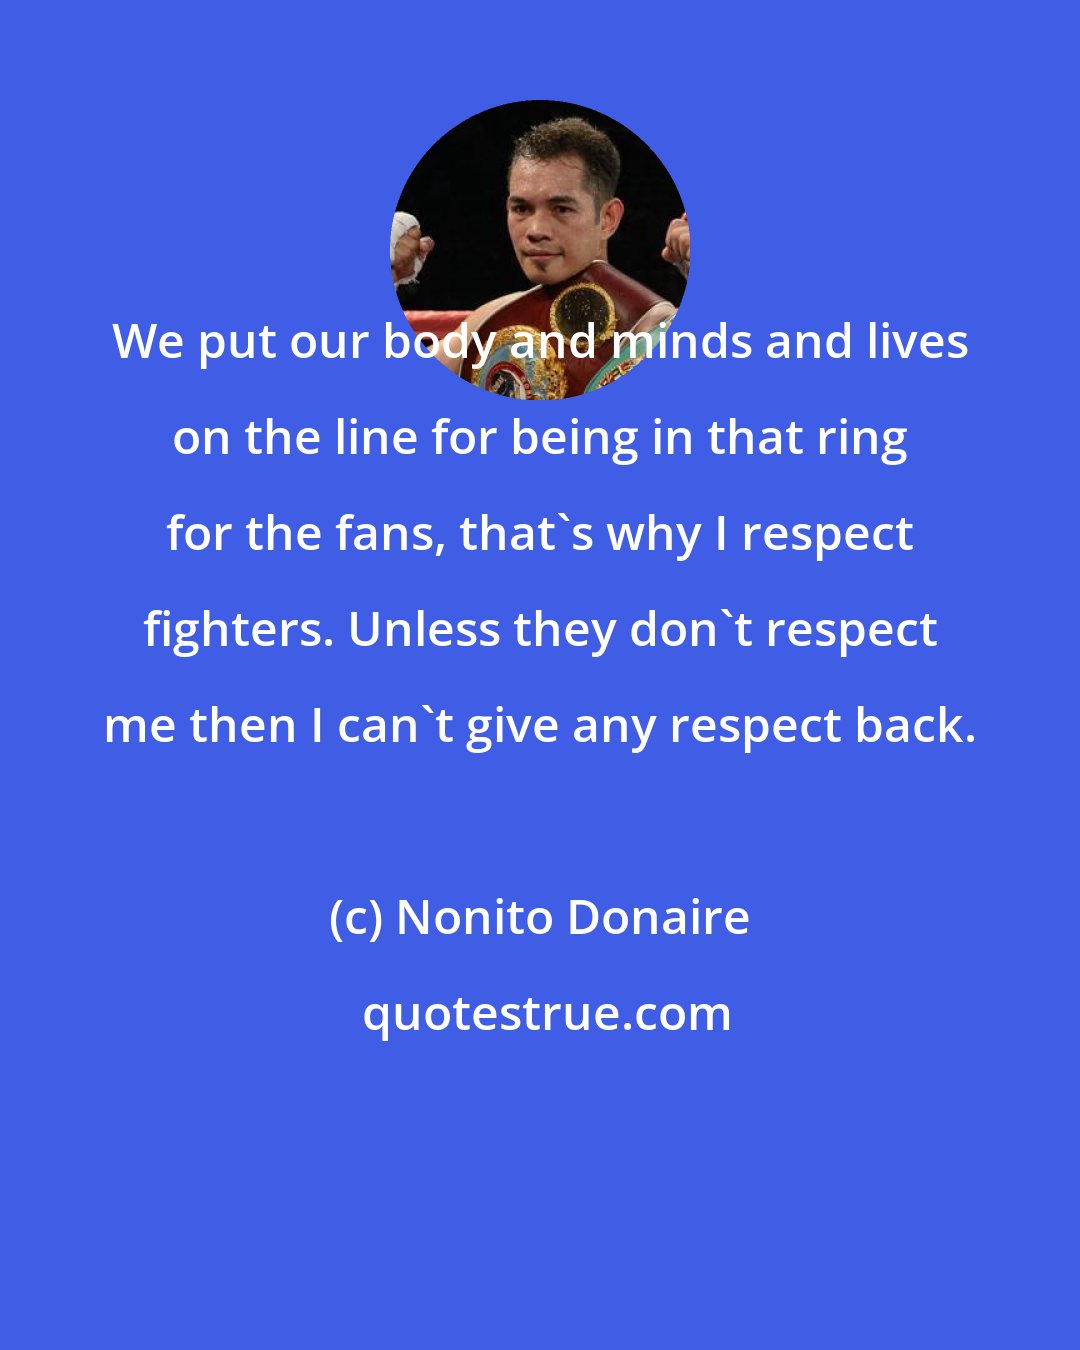 Nonito Donaire: We put our body and minds and lives on the line for being in that ring for the fans, that's why I respect fighters. Unless they don't respect me then I can't give any respect back.